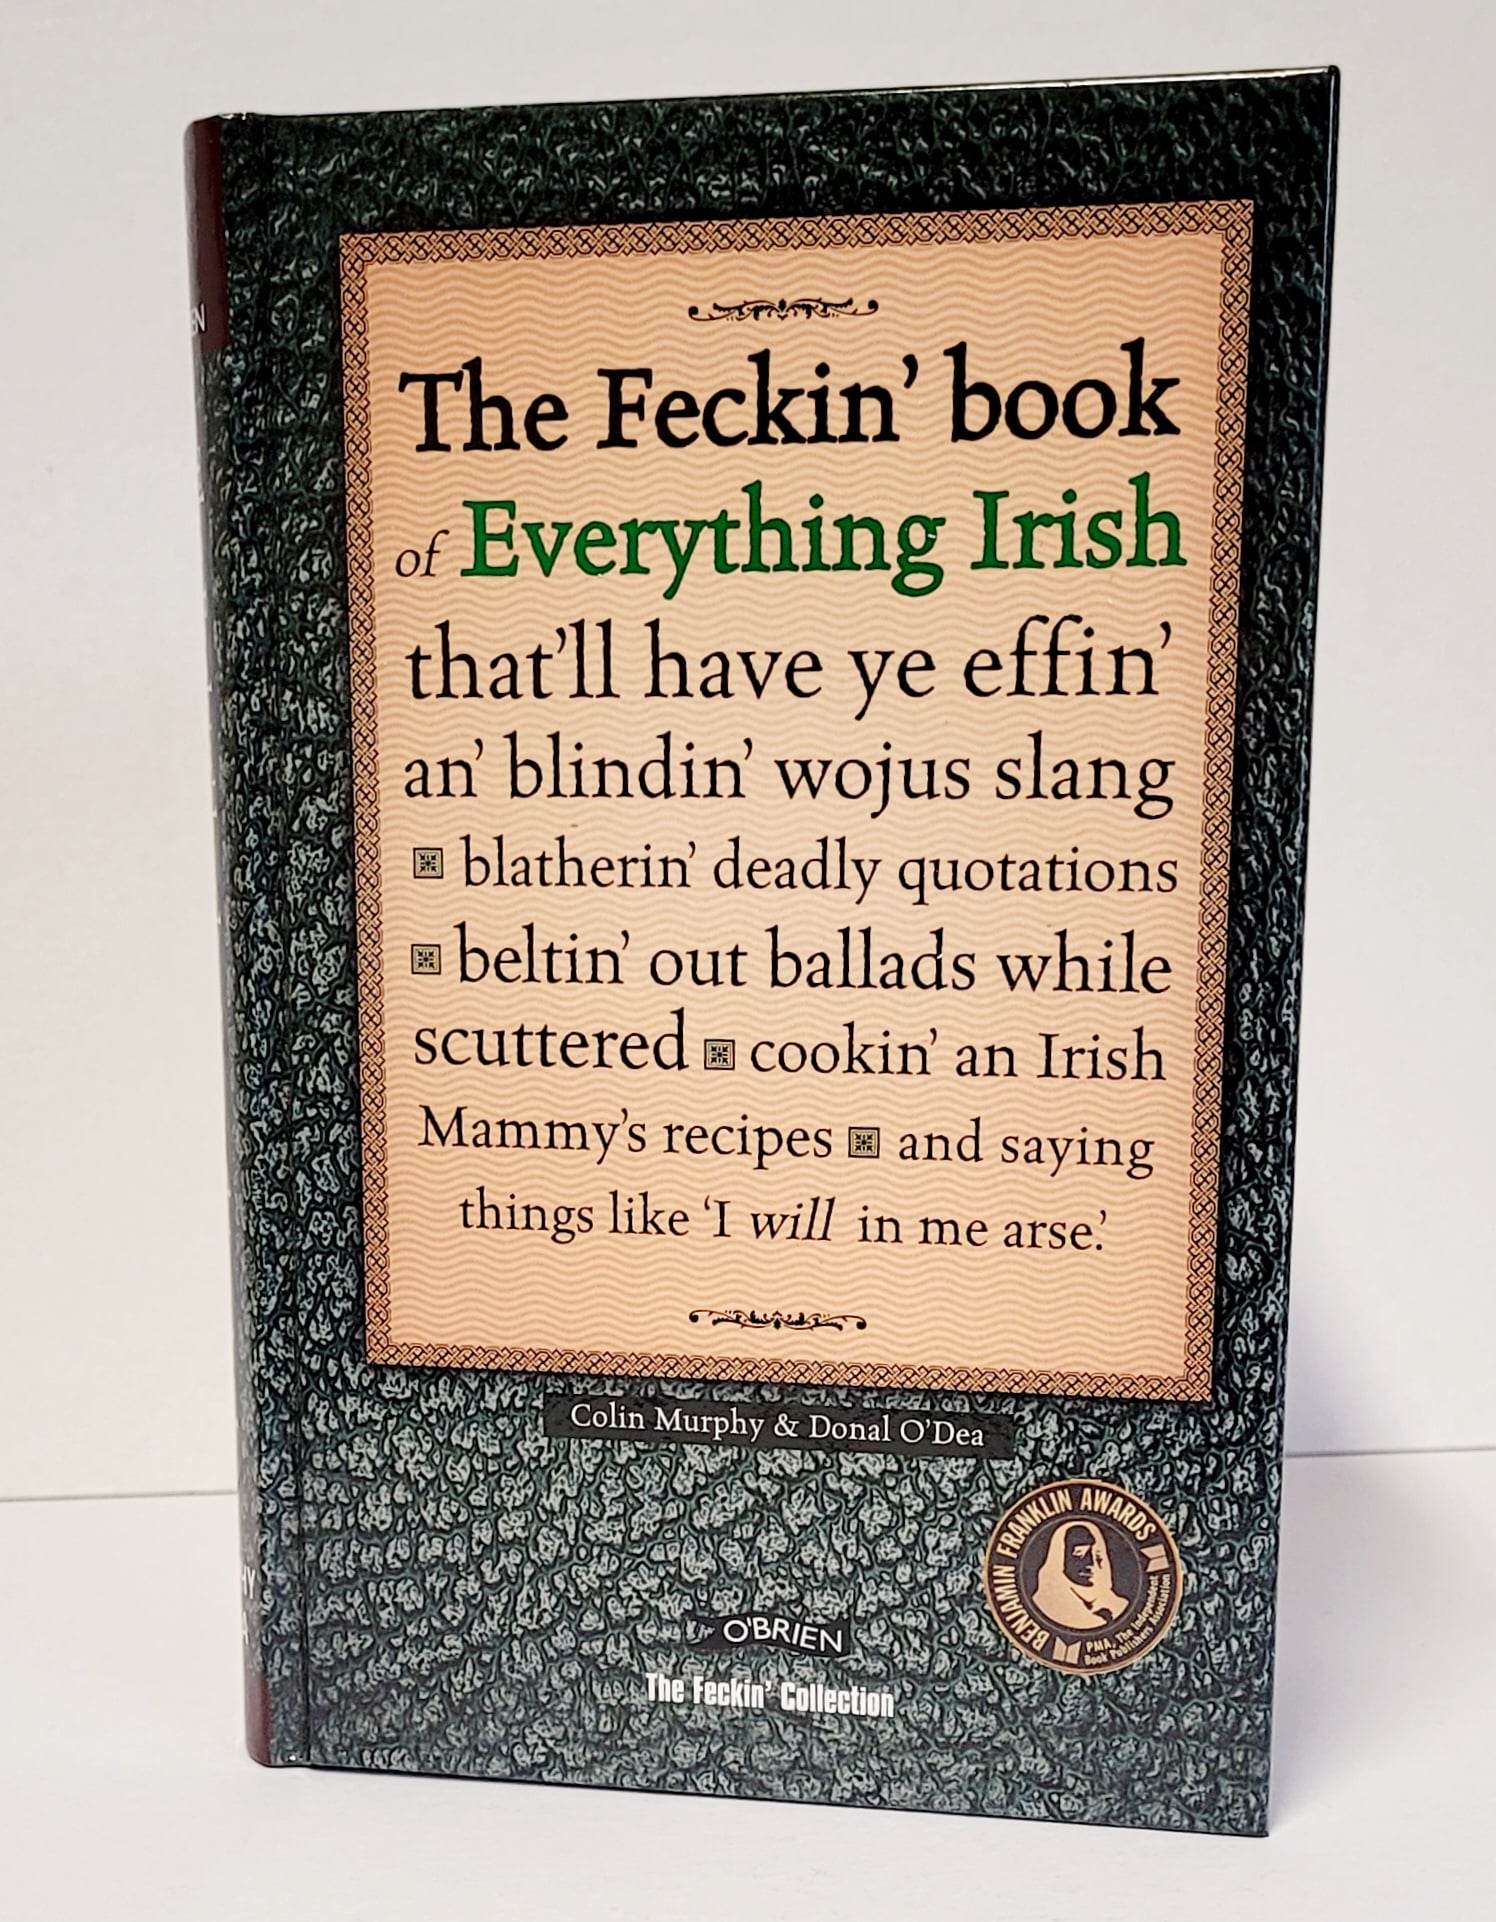 The Fecking Book of Everything Irish by Colin Murphy & Donal O'Dea